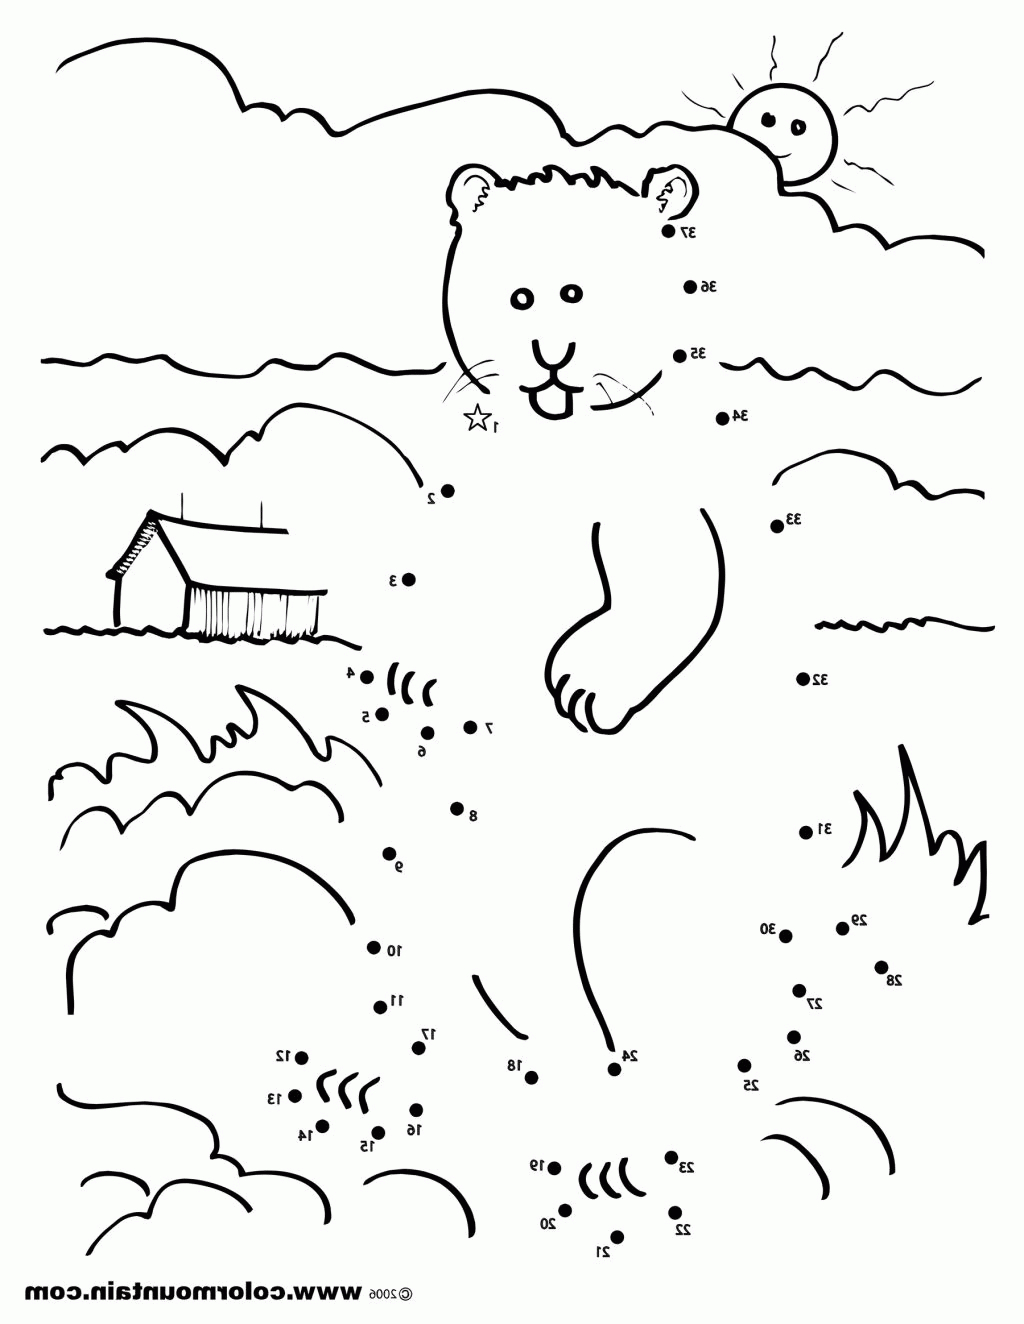 Groundhog Day Printable Coloring Pages Collection Free Coloring Pages For Groundhog Day Pictures